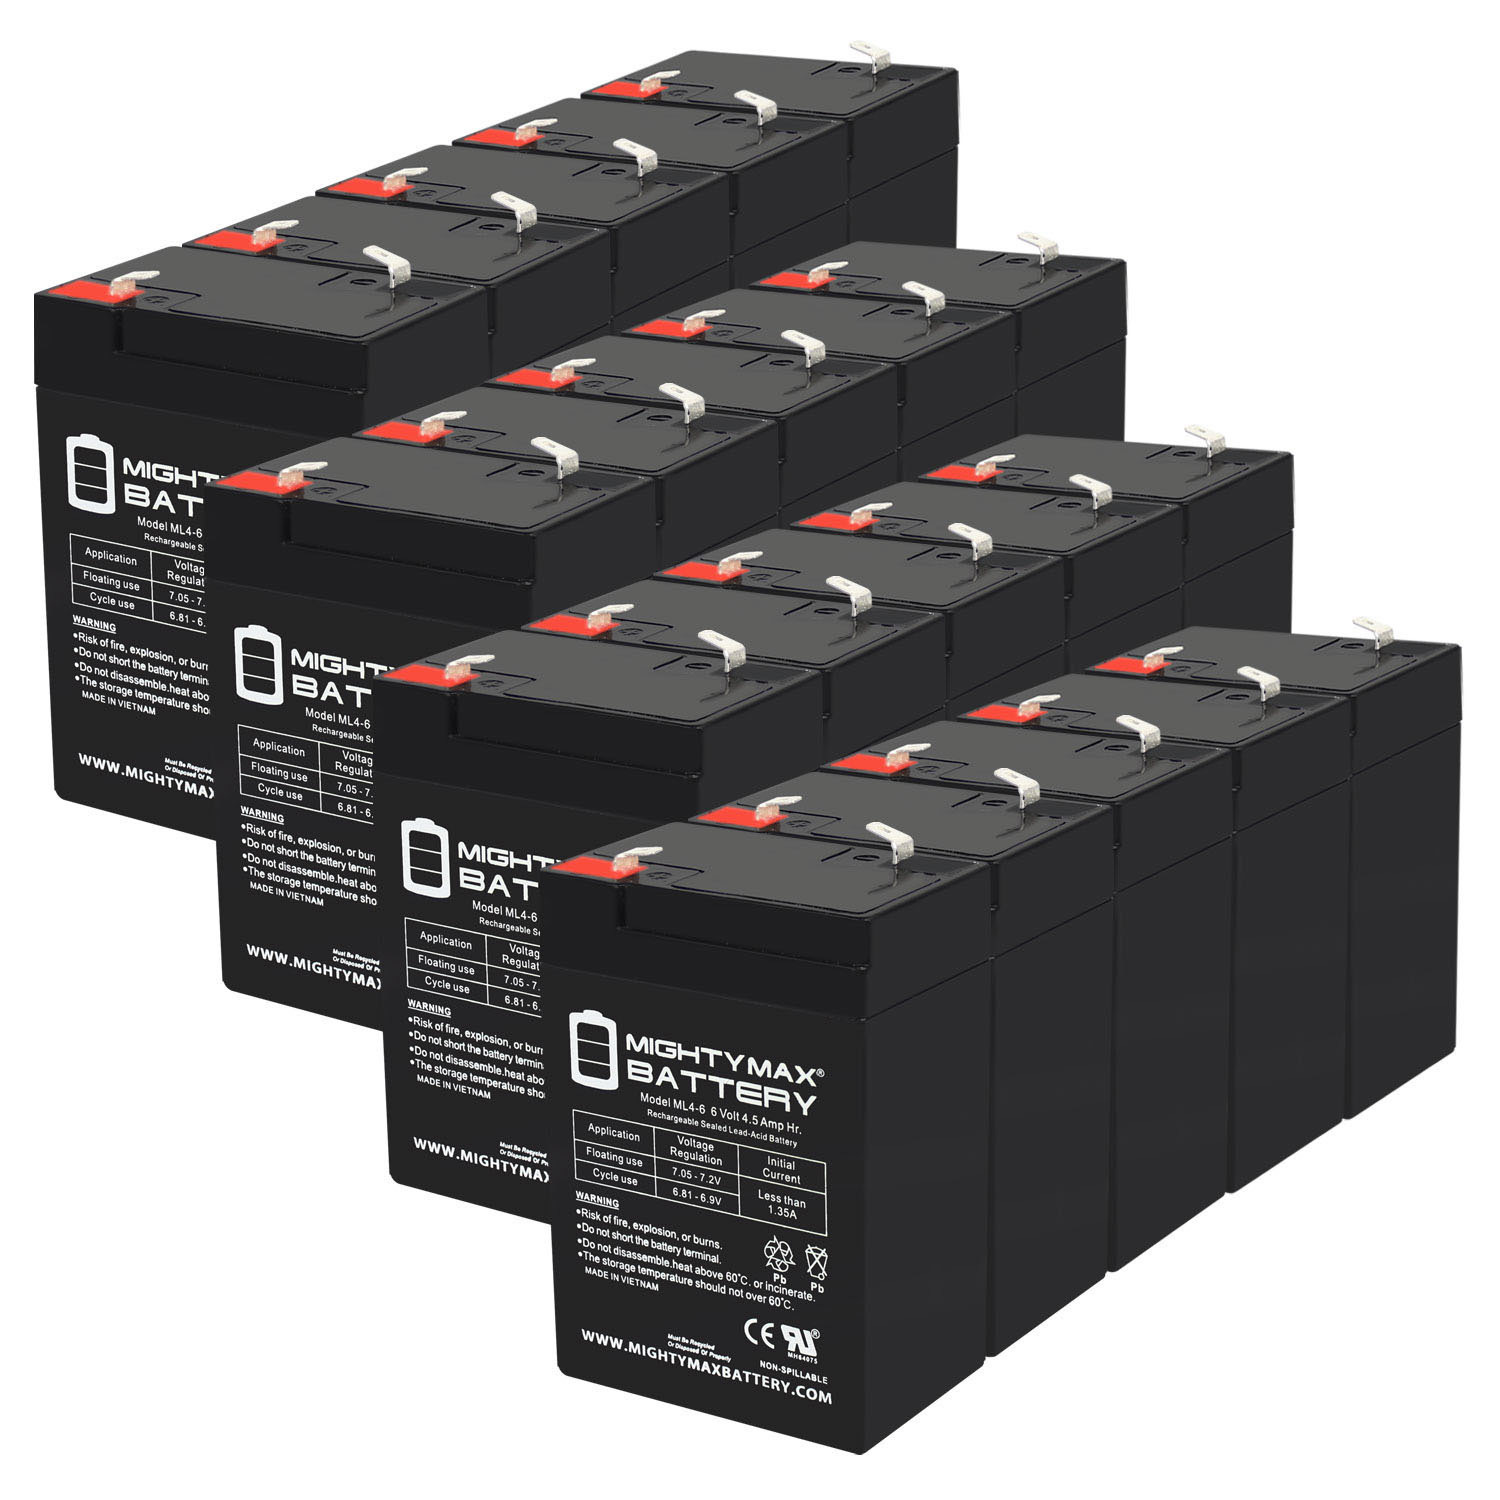 6V 4.5AH SLA Replacement Battery for Dual-Lite ESS-I-2 - 20 Pack